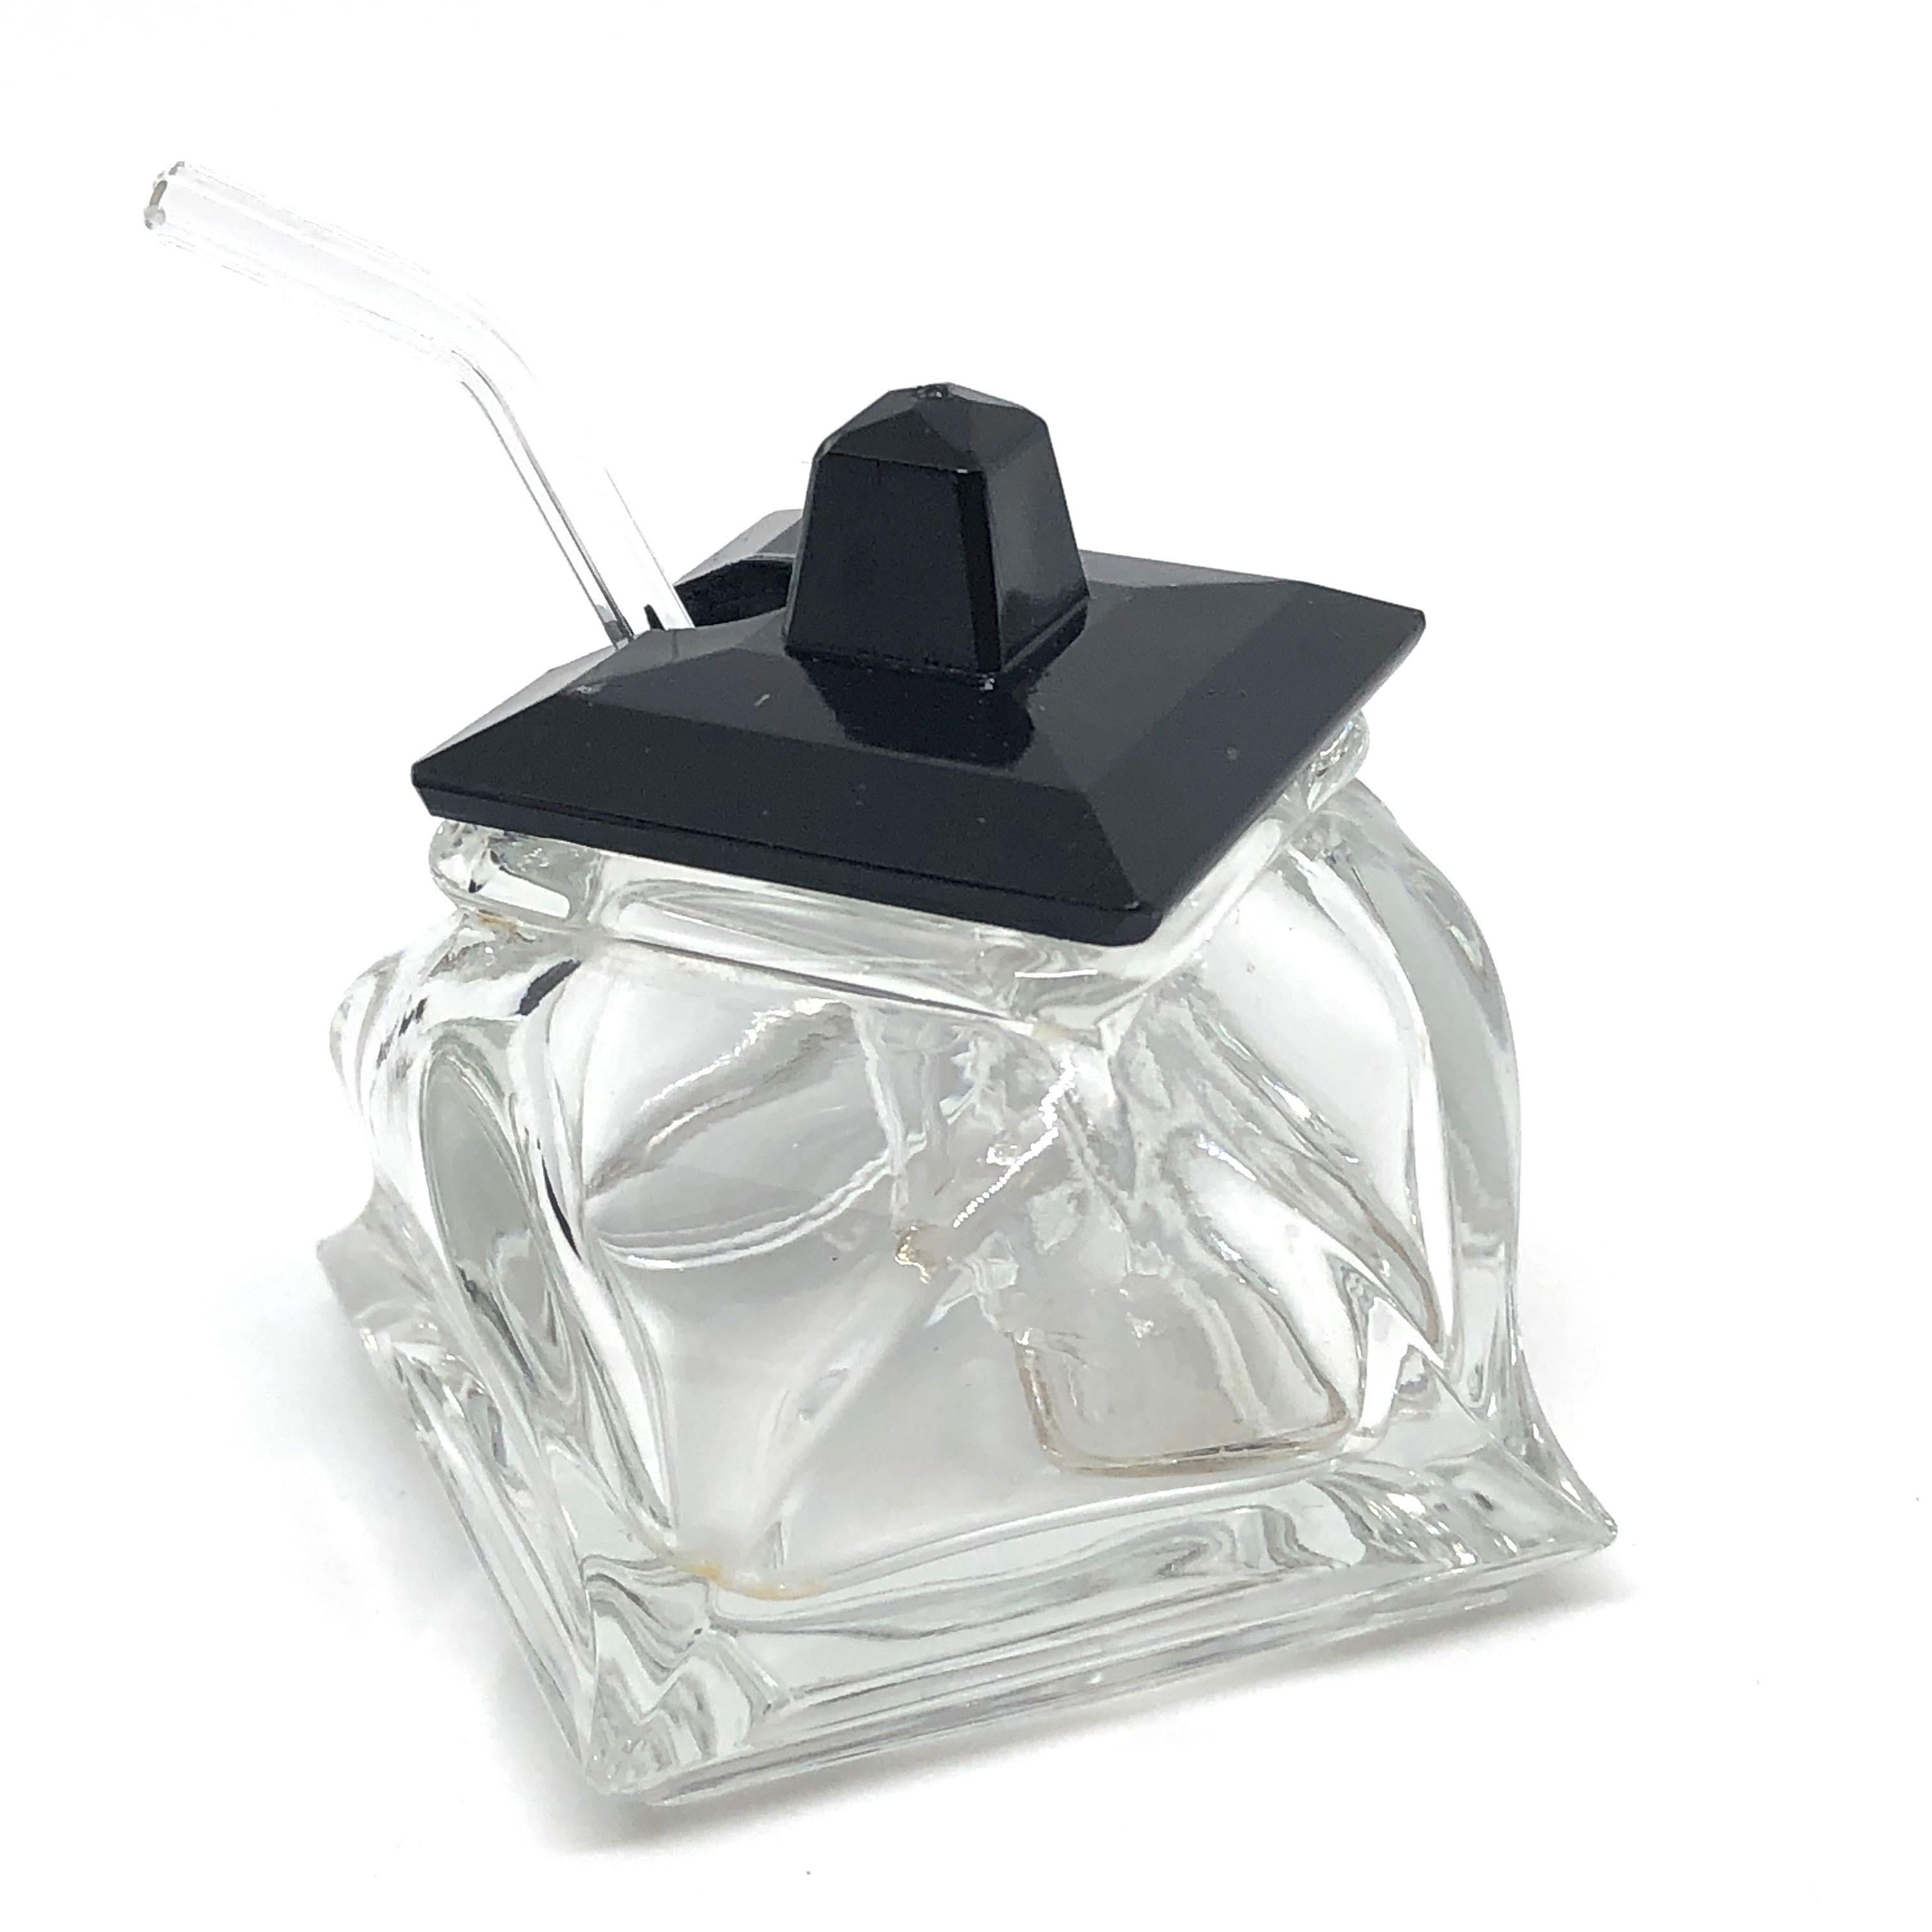 Mid-20th Century Art Deco Black and Clear Glass Condiment Set Vintage Europe, Sweden, 1930s For Sale